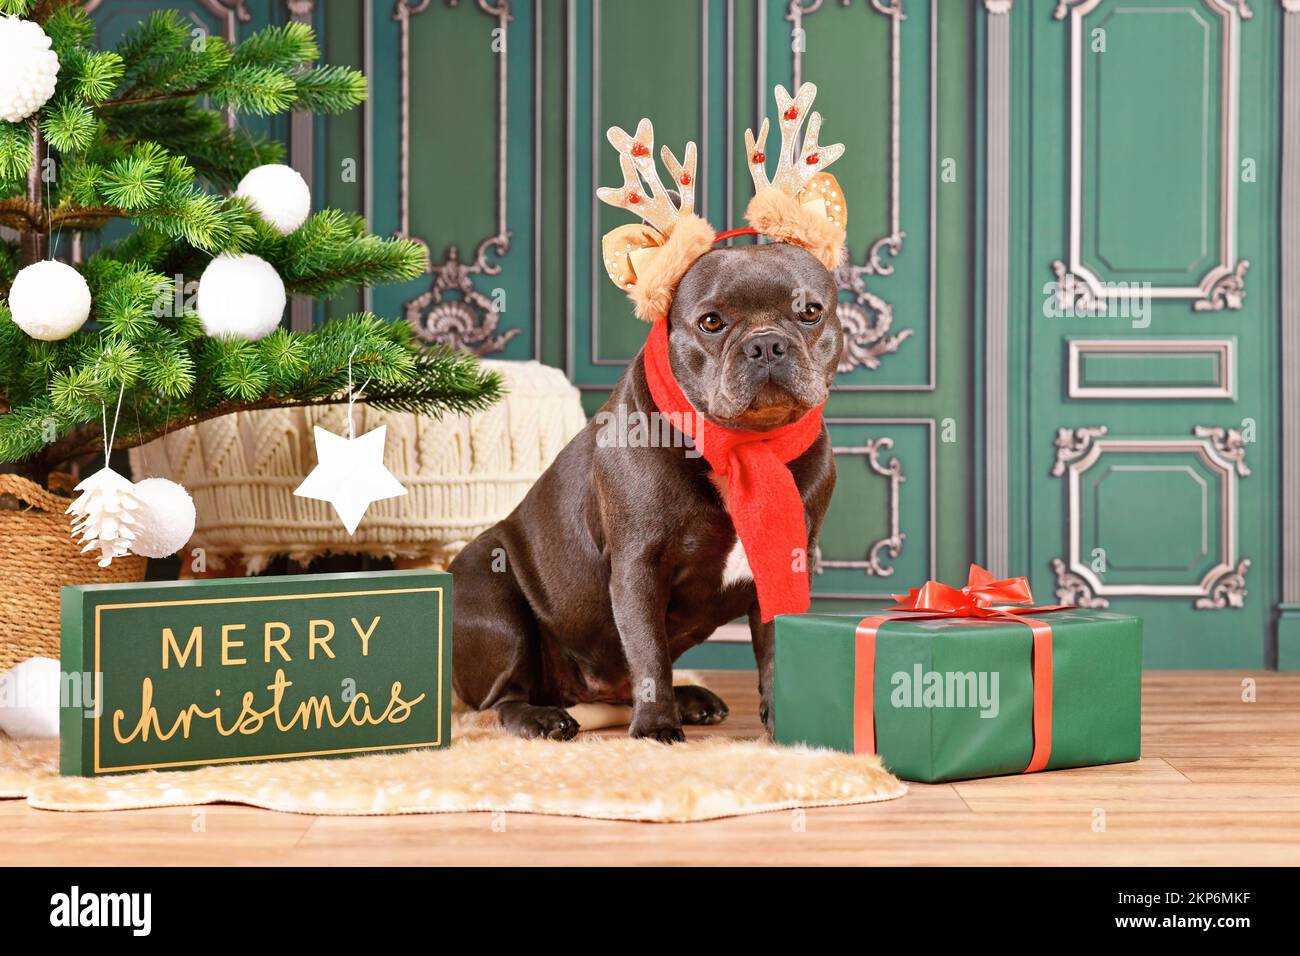 French Bulldog dog with reindeer costume antlers and red winter scarf sitting next to Christmas tree Stock Photo